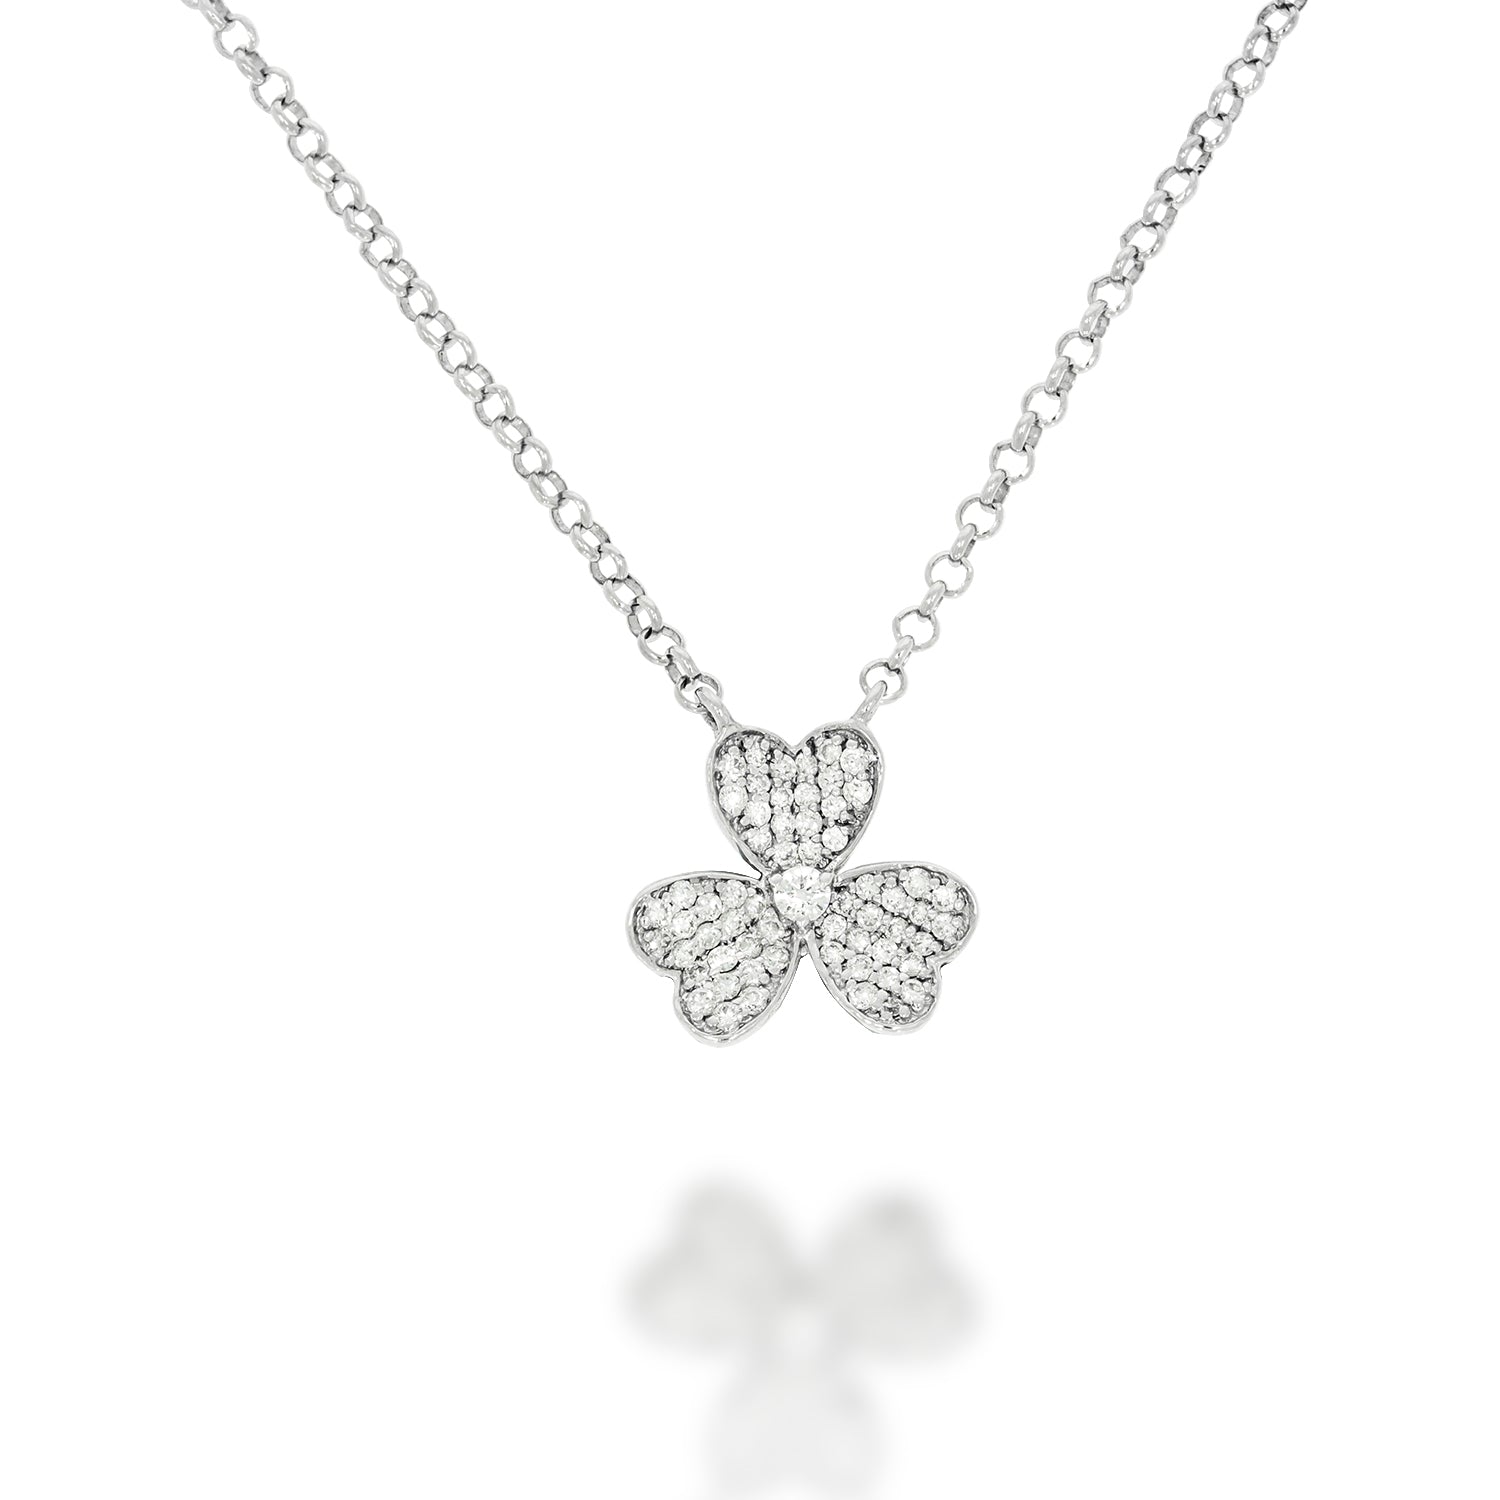 Buy Black and White Clover Pendant Rose Gold Necklace Online